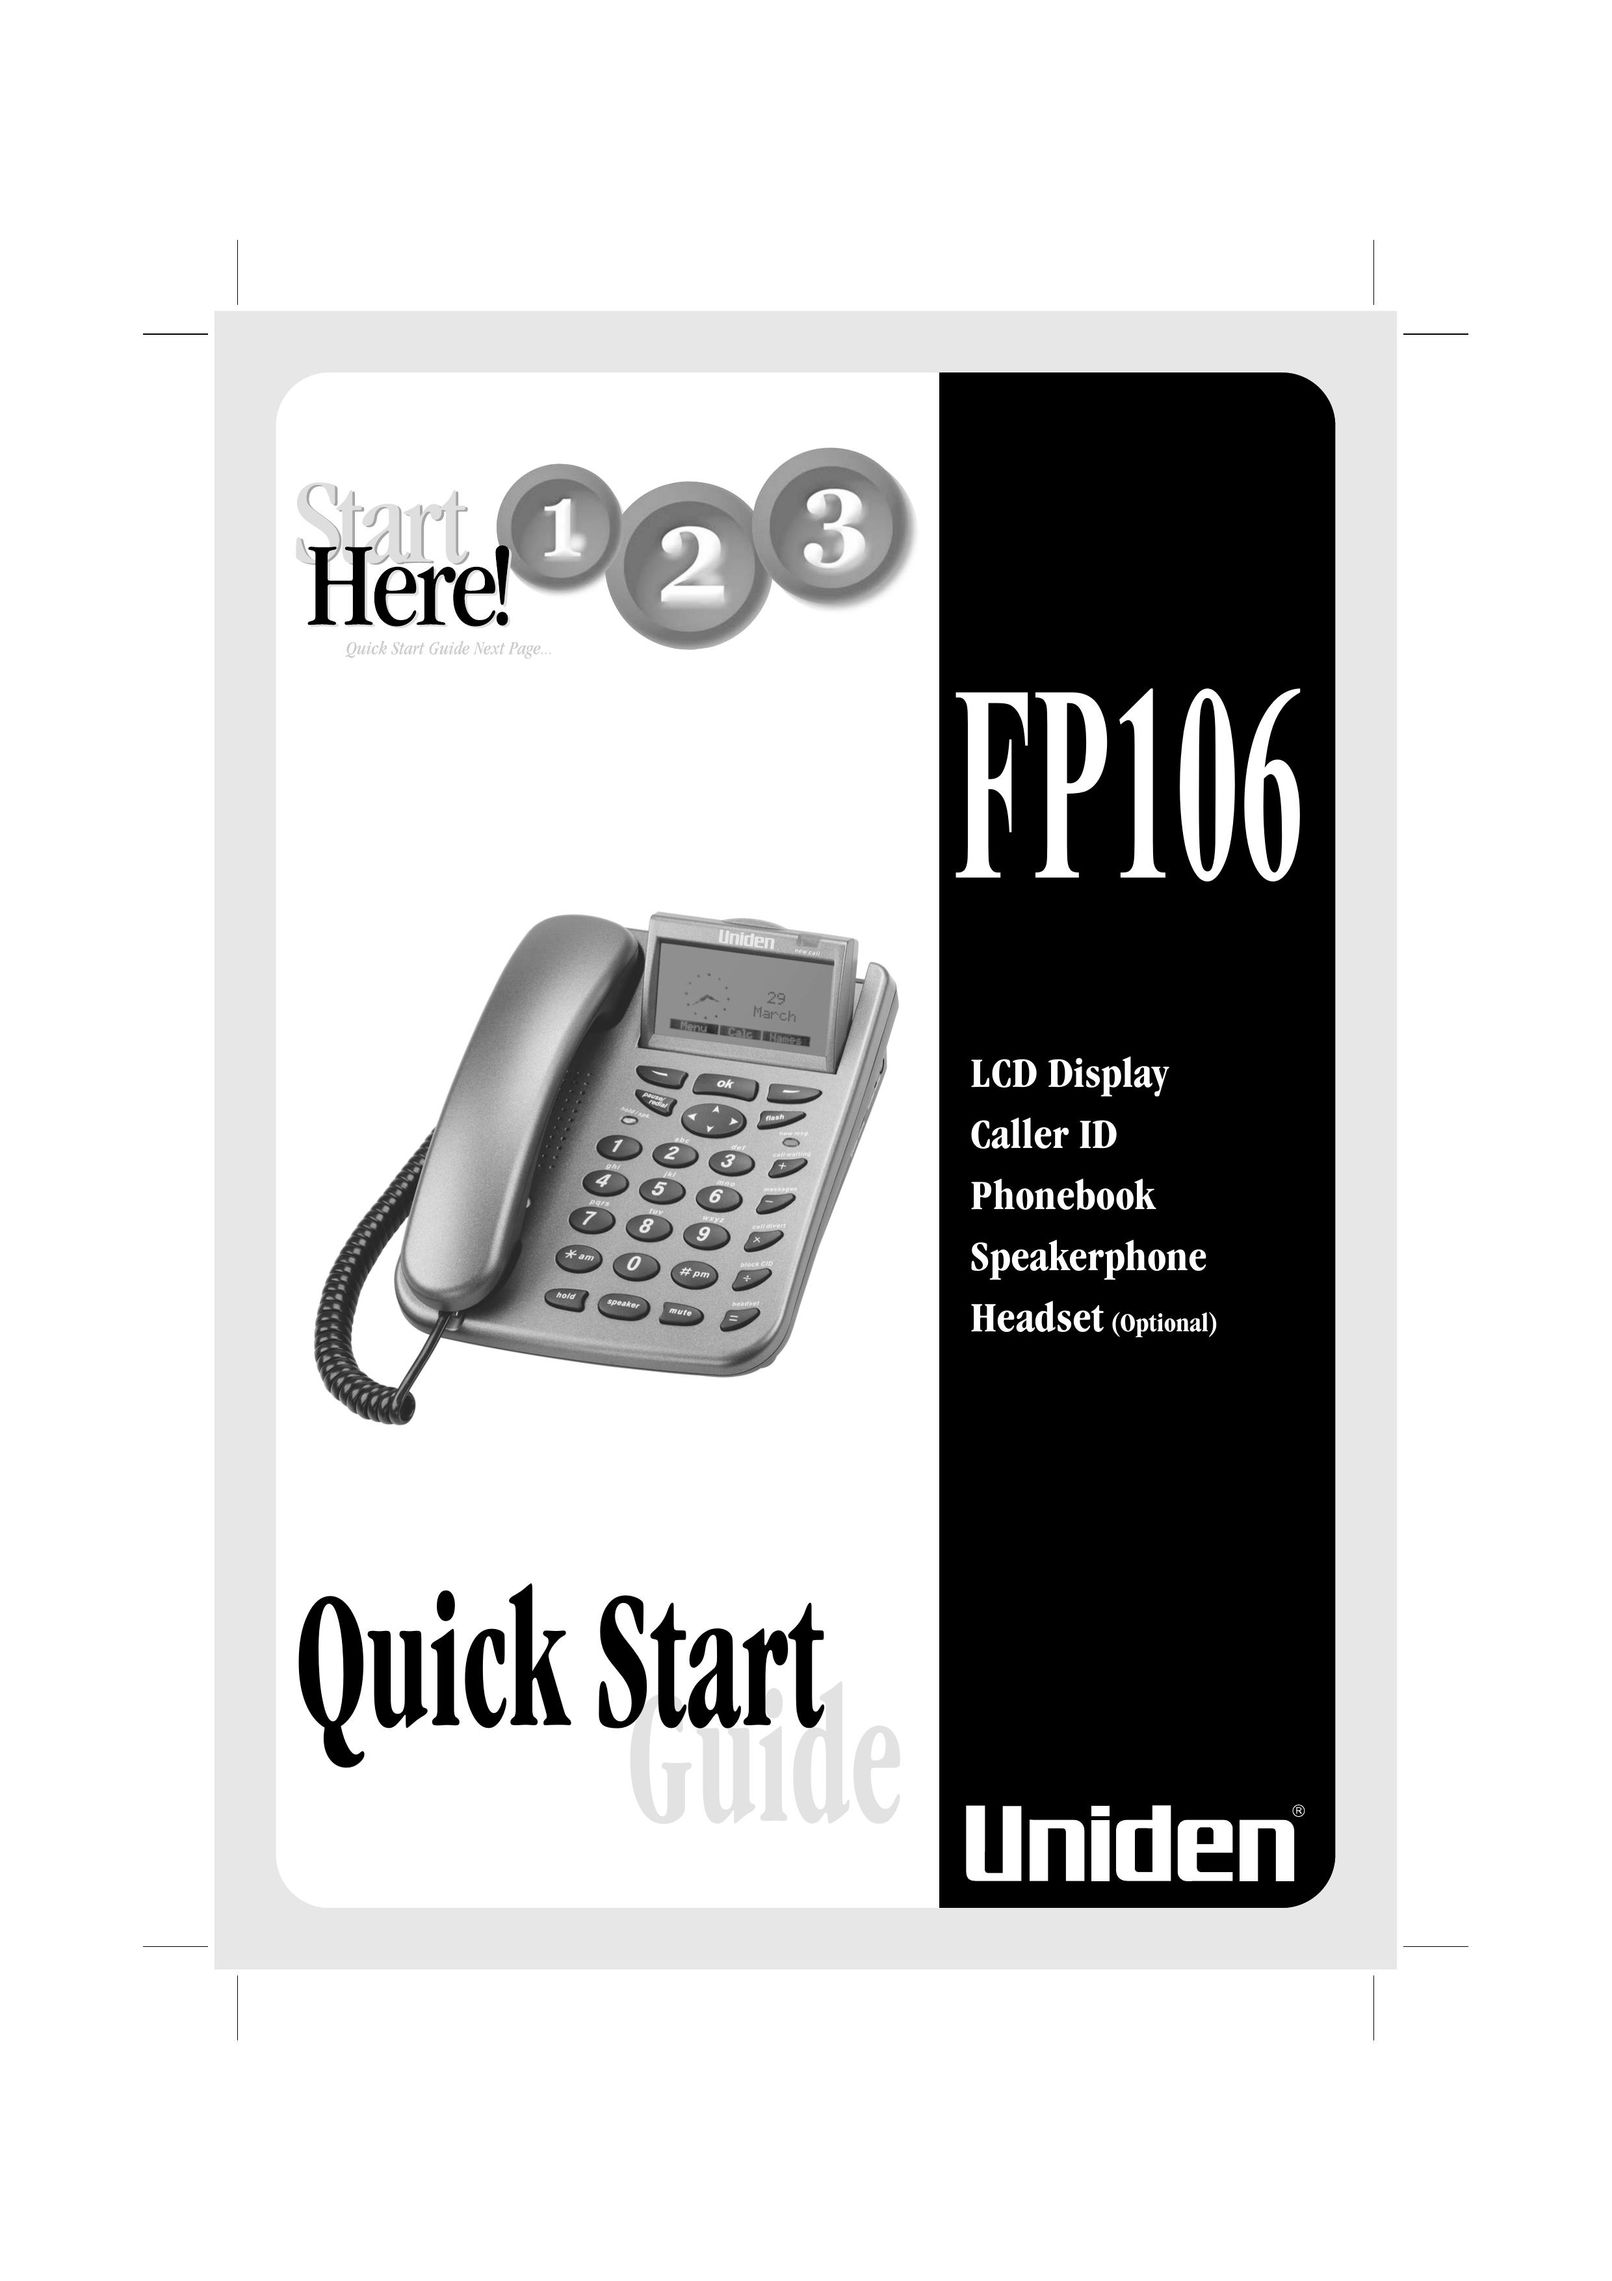 Uniden FP106 Conference Phone User Manual